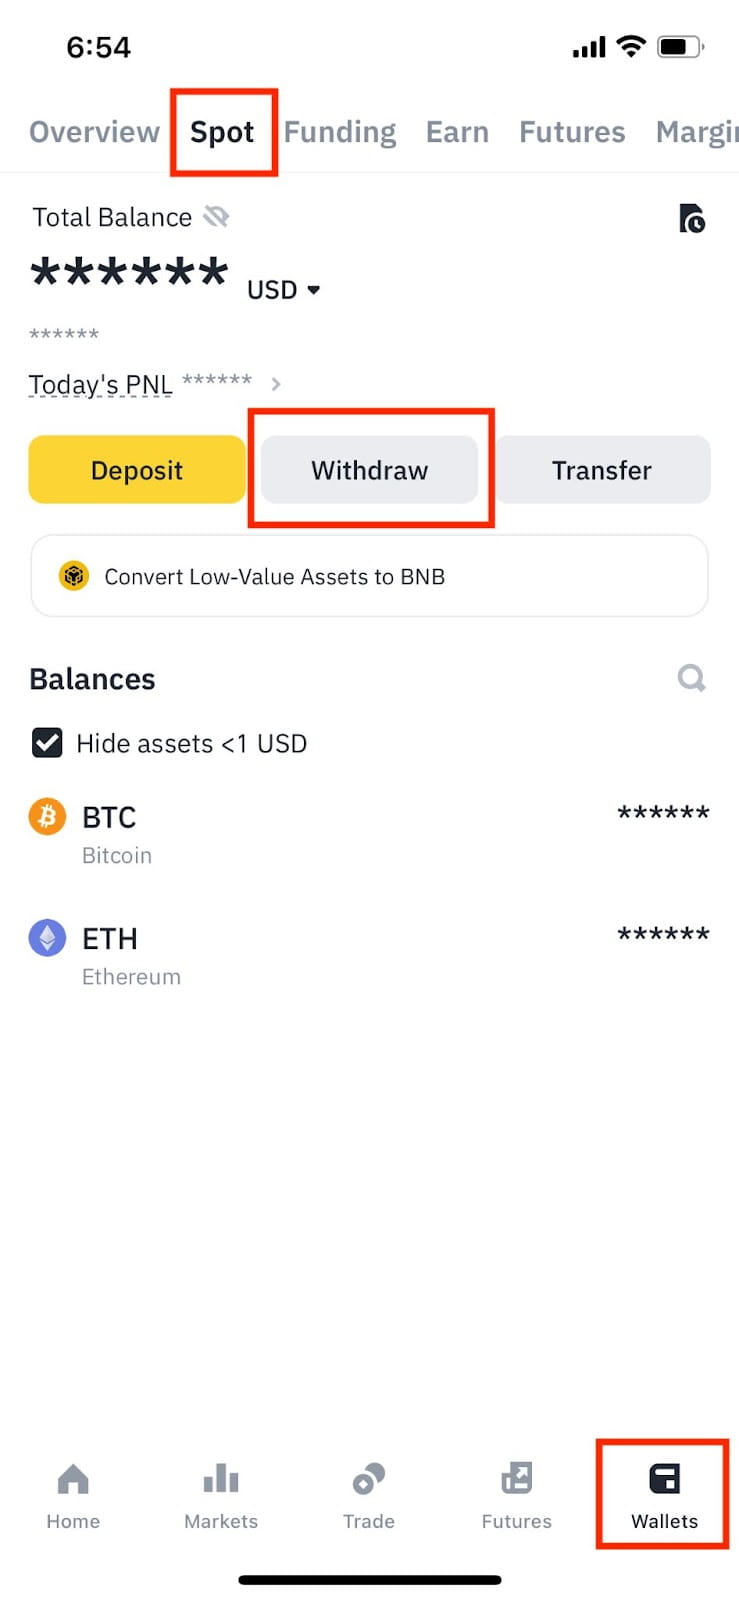 How to Withdraw from Binance: Step-By-Step Instructions